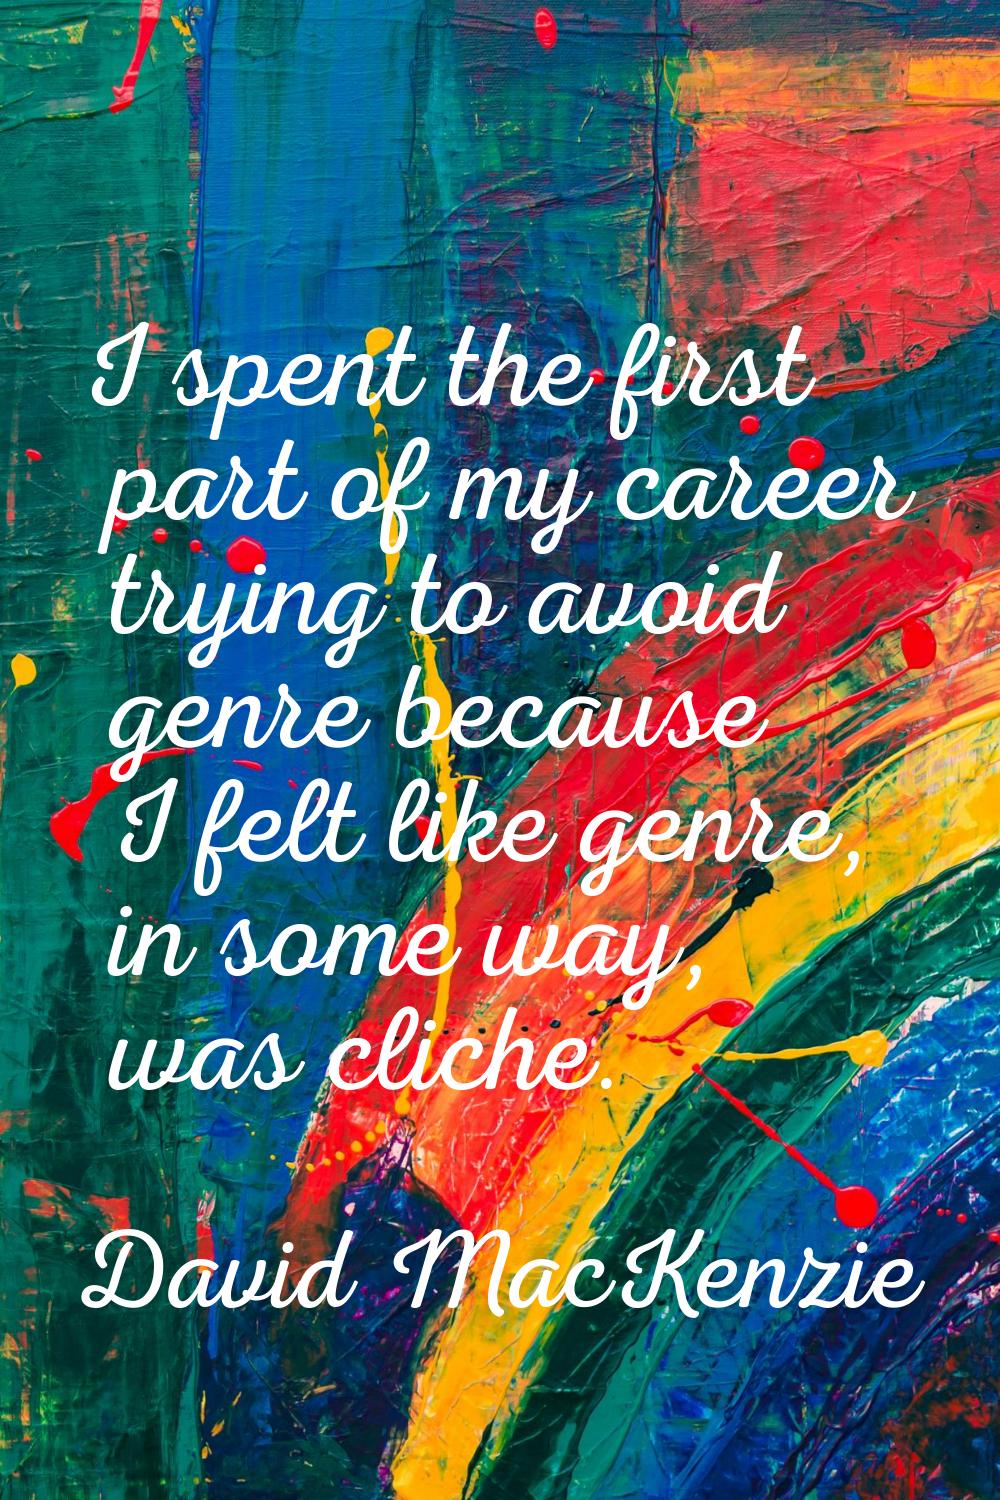 I spent the first part of my career trying to avoid genre because I felt like genre, in some way, w